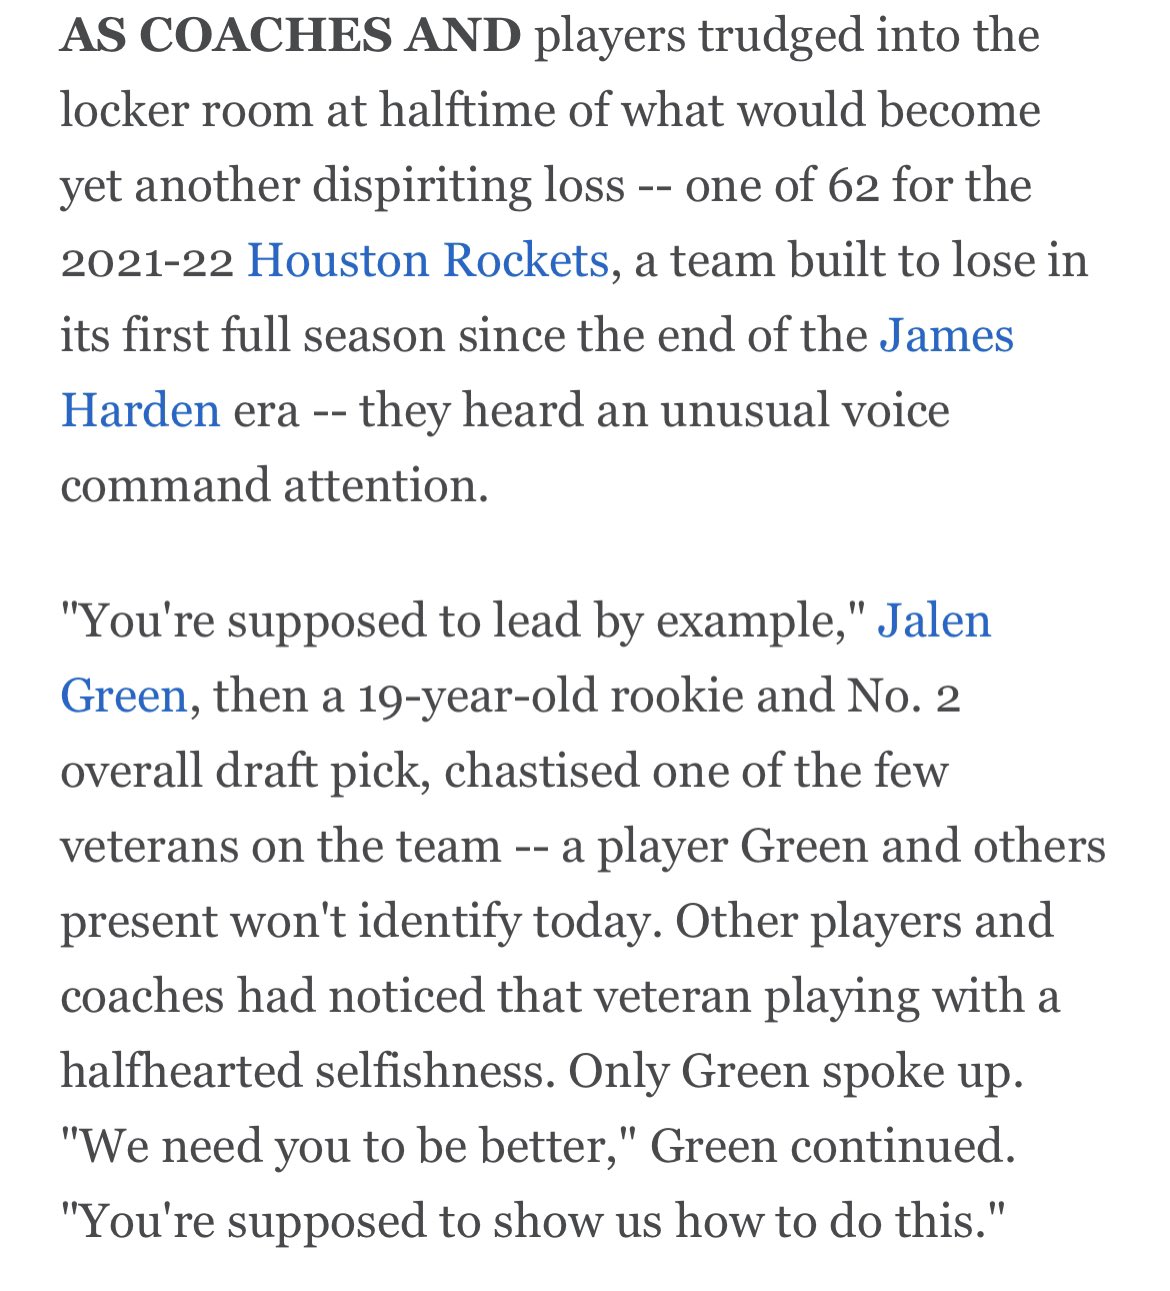 Why Jalen Green is the player to lead a Houston Rockets ascension